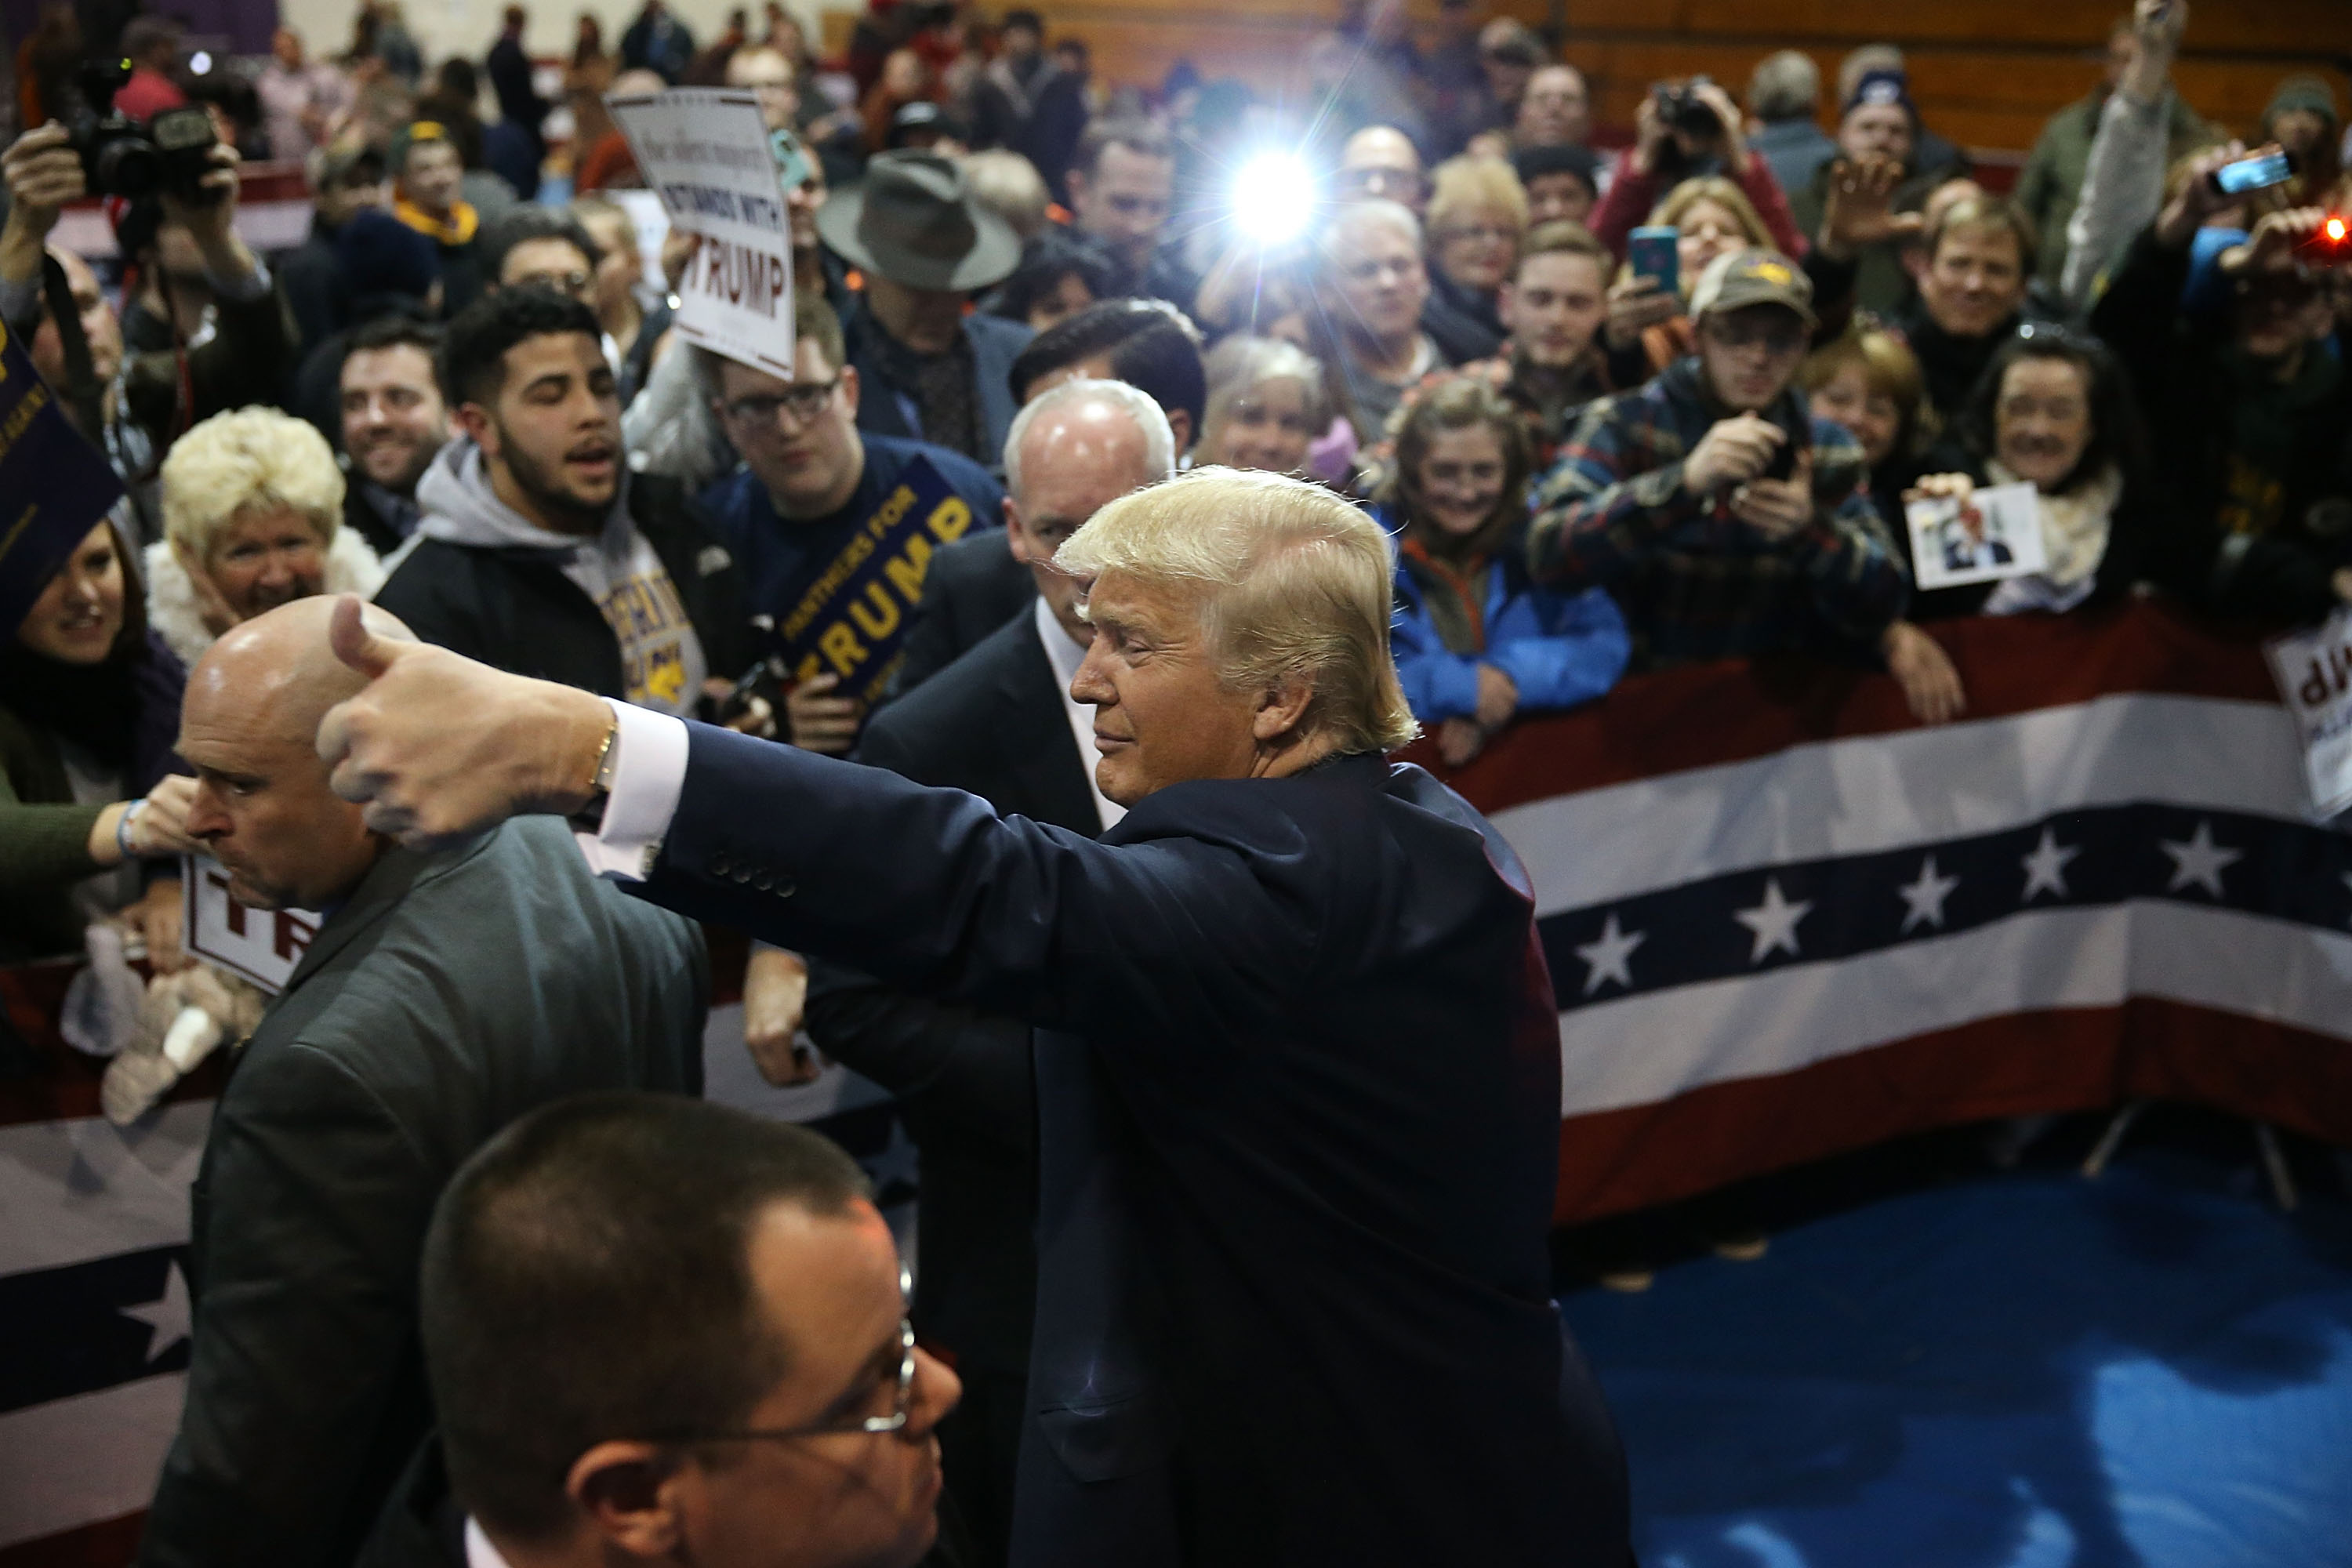 Republican presidential candidate Donald Trump greets people during a campaign event at the University of Northern Iowa in Cedar Falls, Iowa on Jan. 12, 2016. (Joe Raedle—Getty Images)